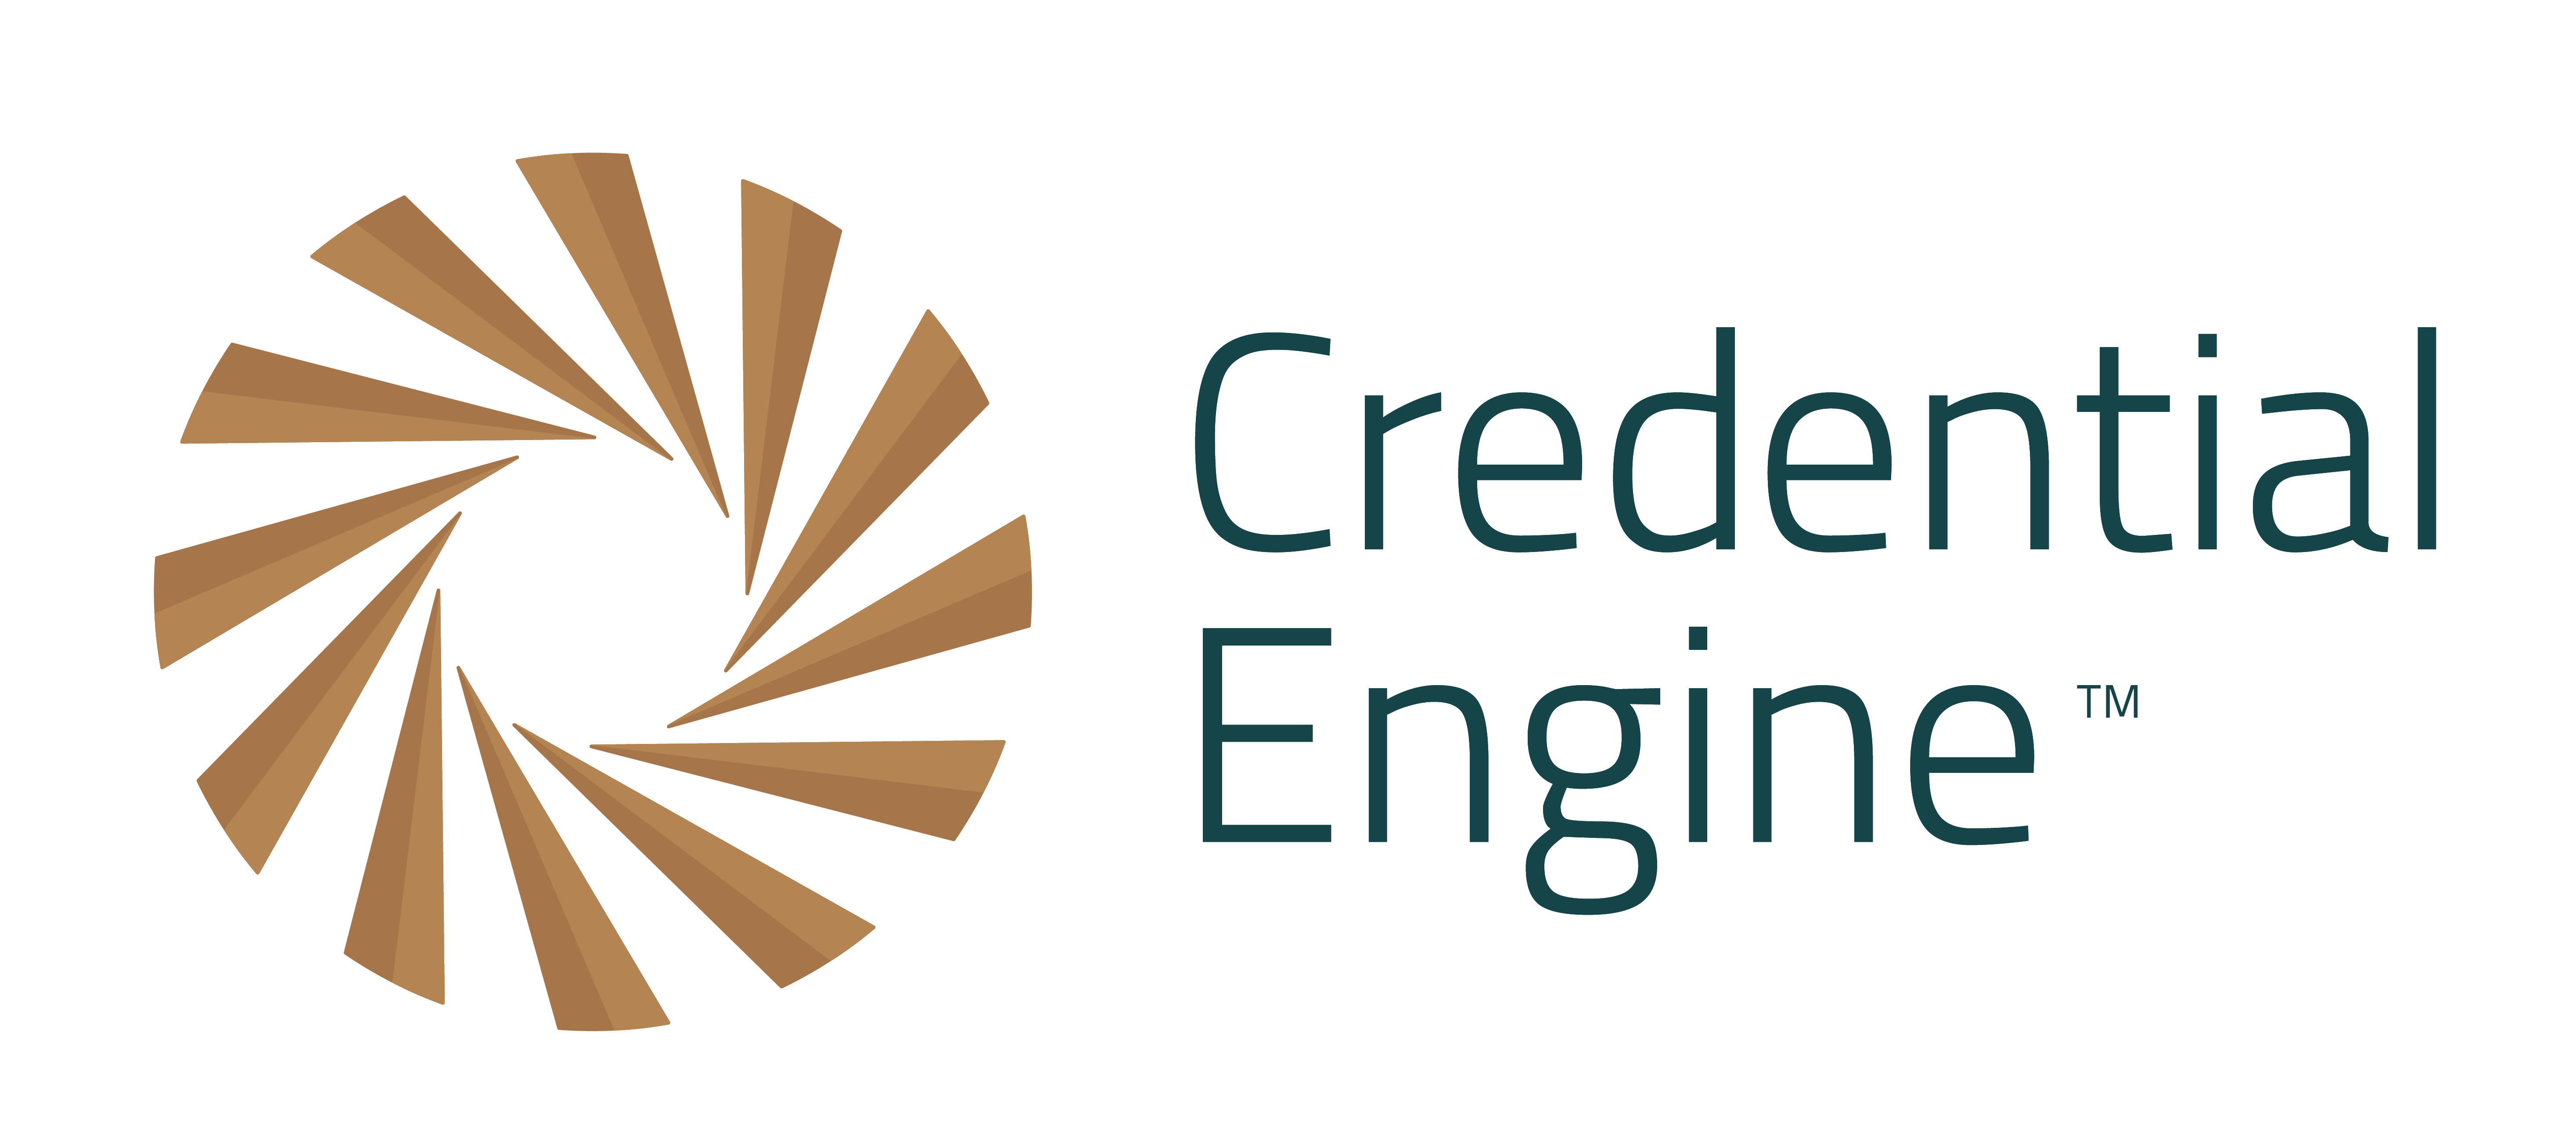 credential-engine_ce-logo.png